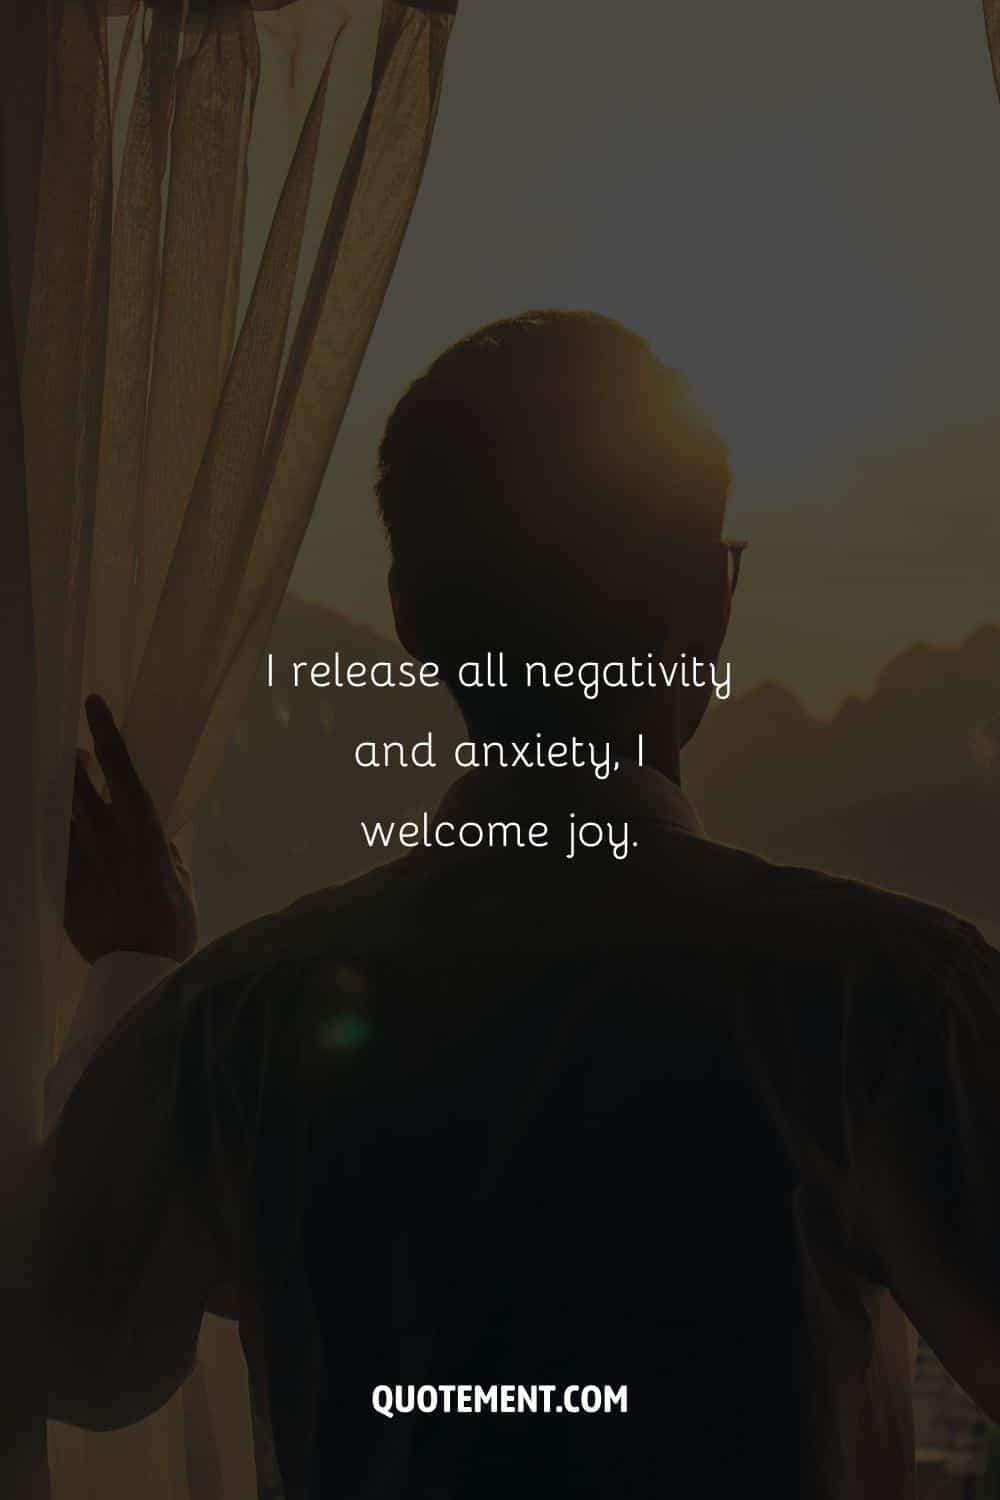 A man gazing through curtains representing an affirmation for anxiety.
